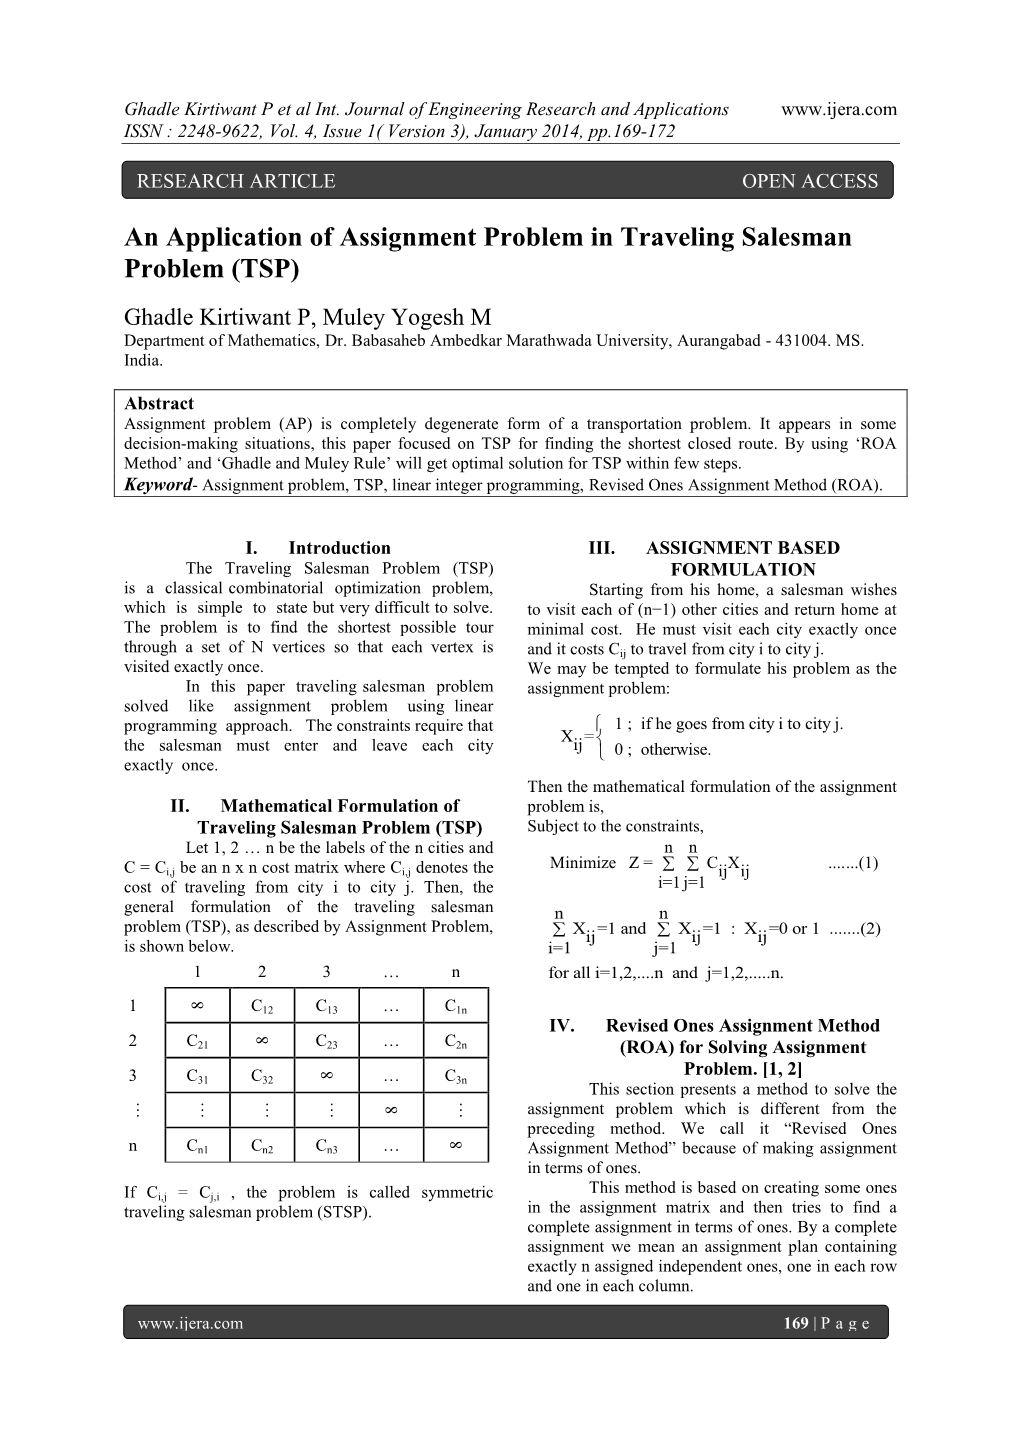 An Application of Assignment Problem in Traveling Salesman Problem (TSP)